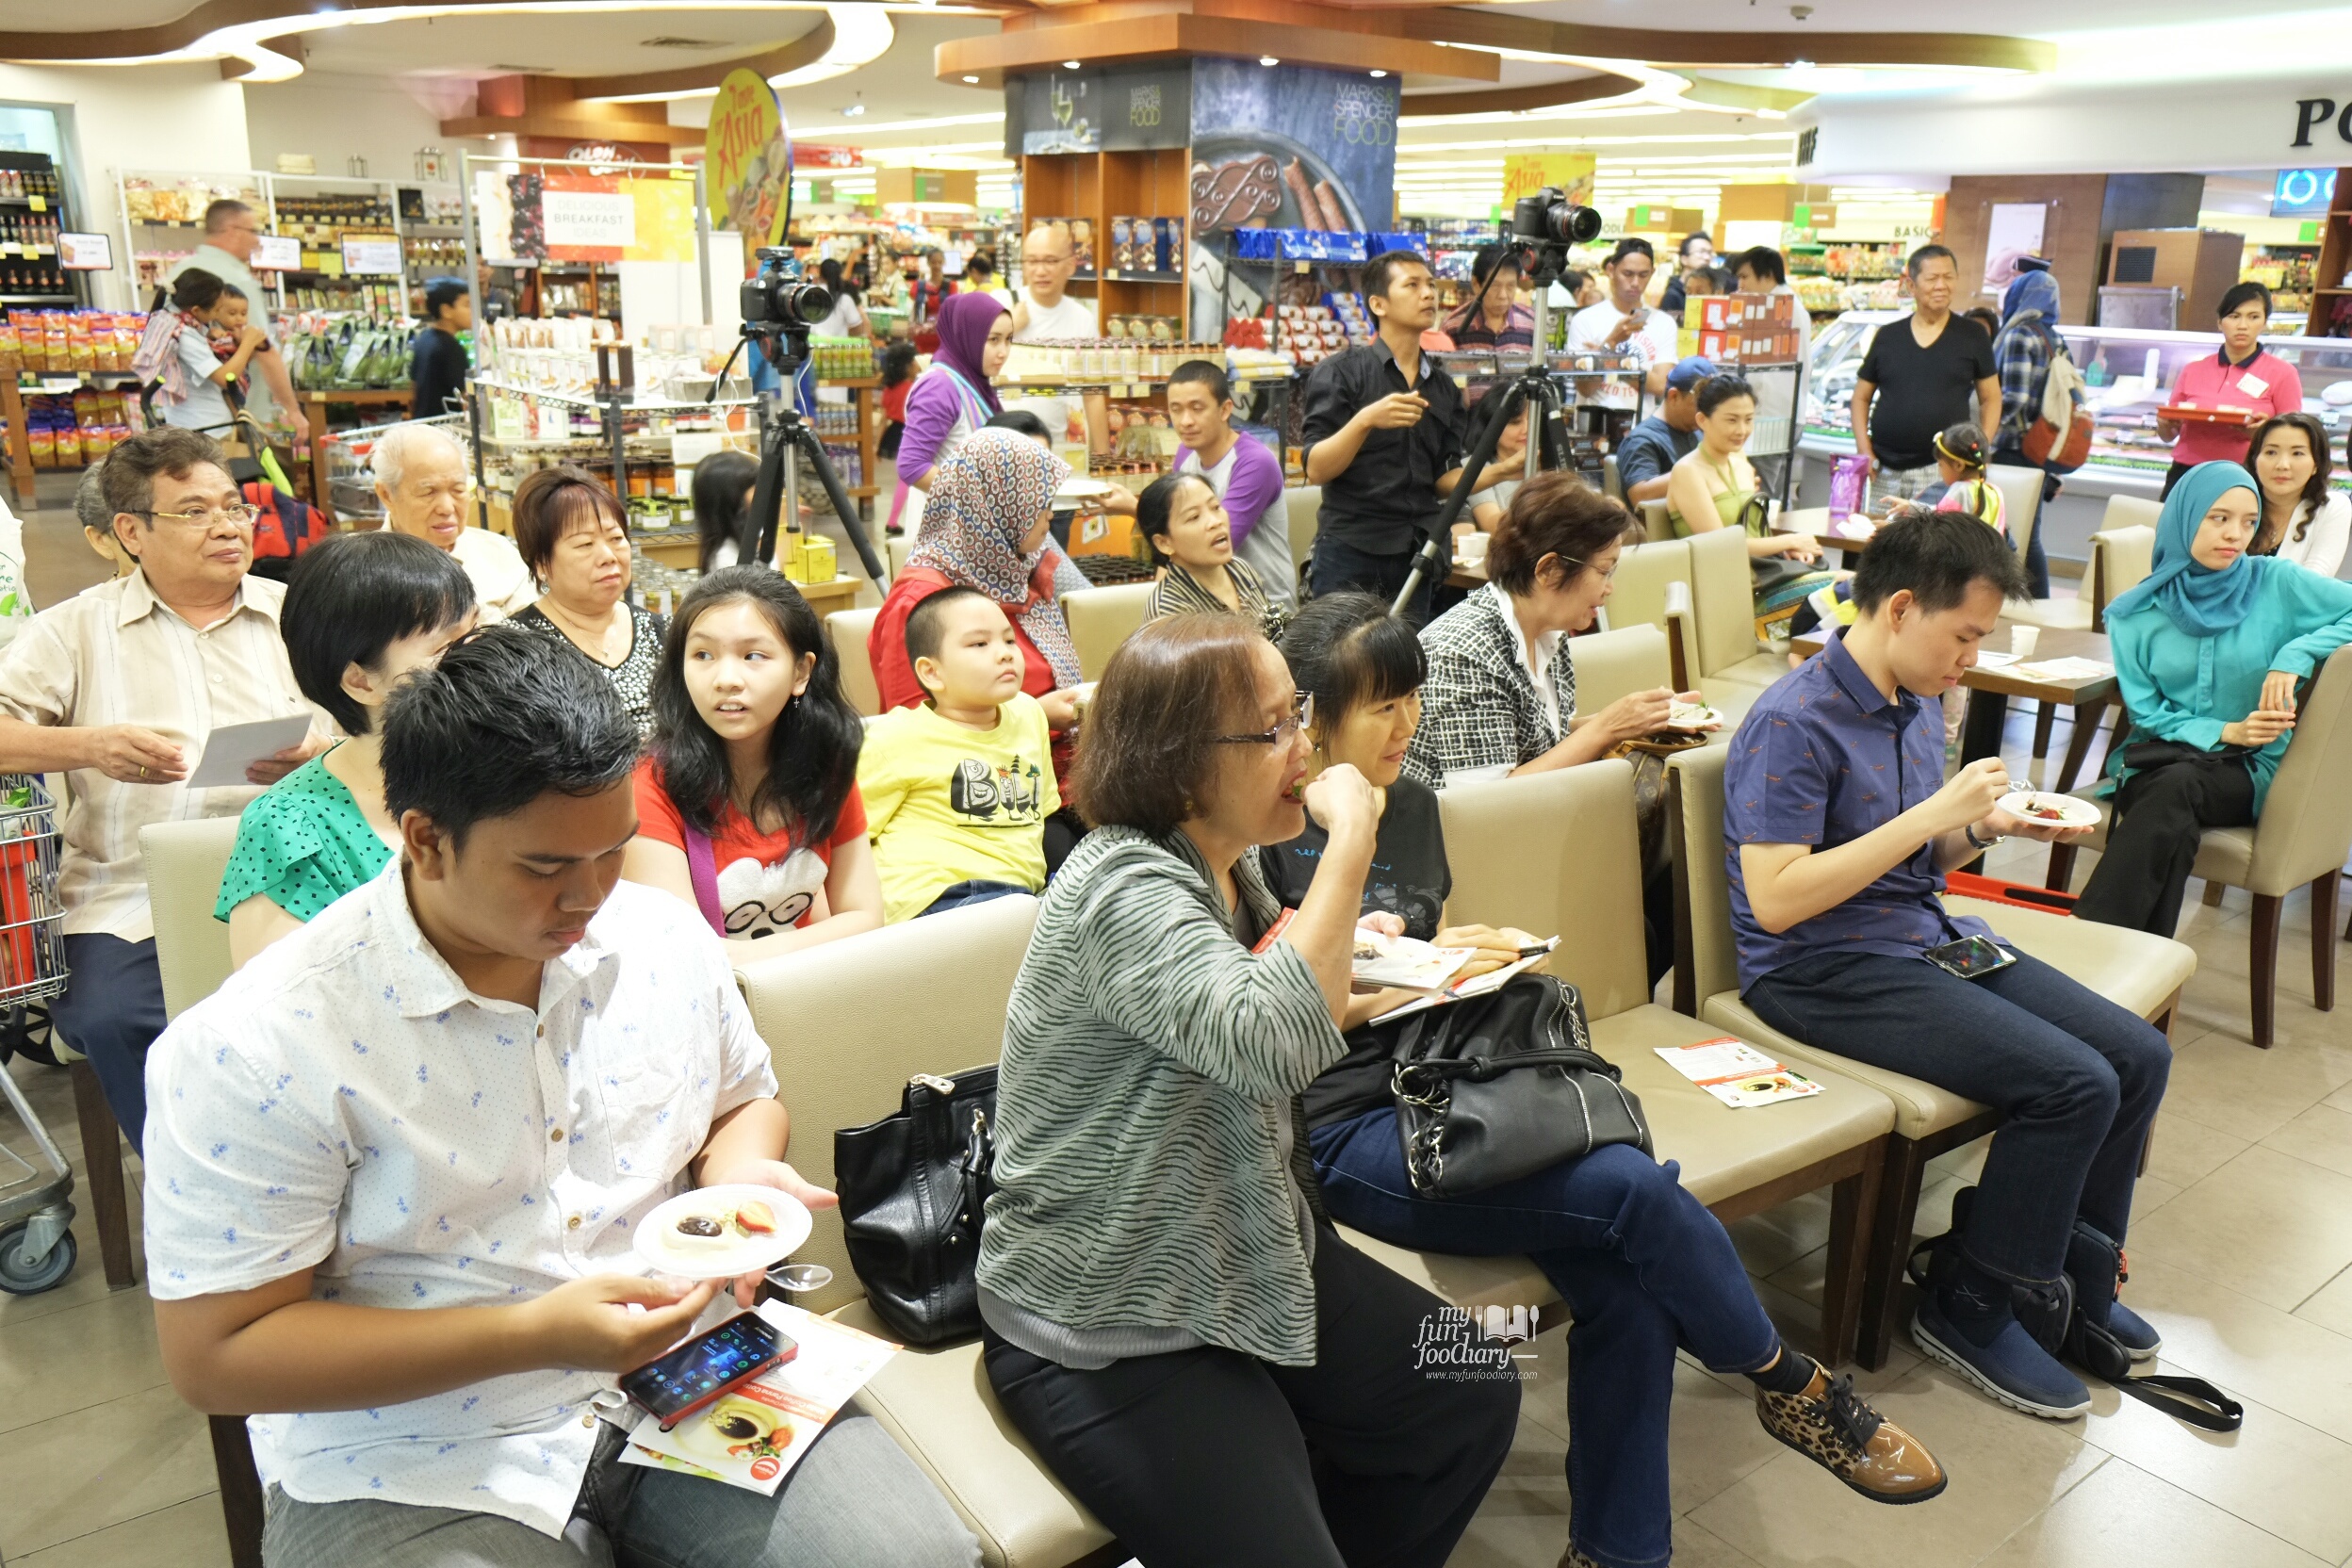 The Crowd at Tasty Singapore event at Food Hall Plaza Senayan by Myfunfoodiary